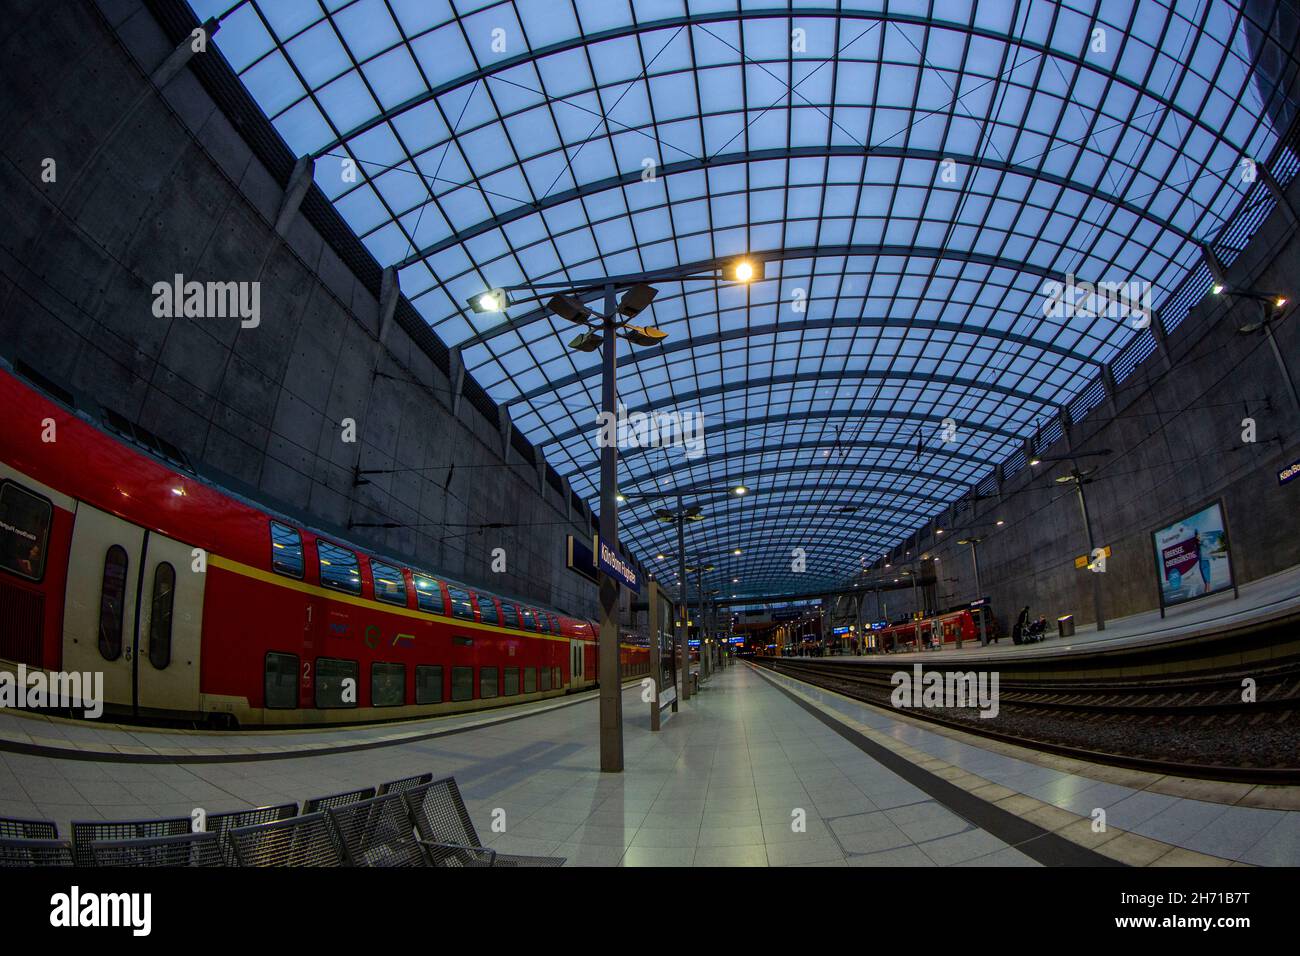 Railway station at Cologne Bonn airport (CGN) in Germany. Stock Photo